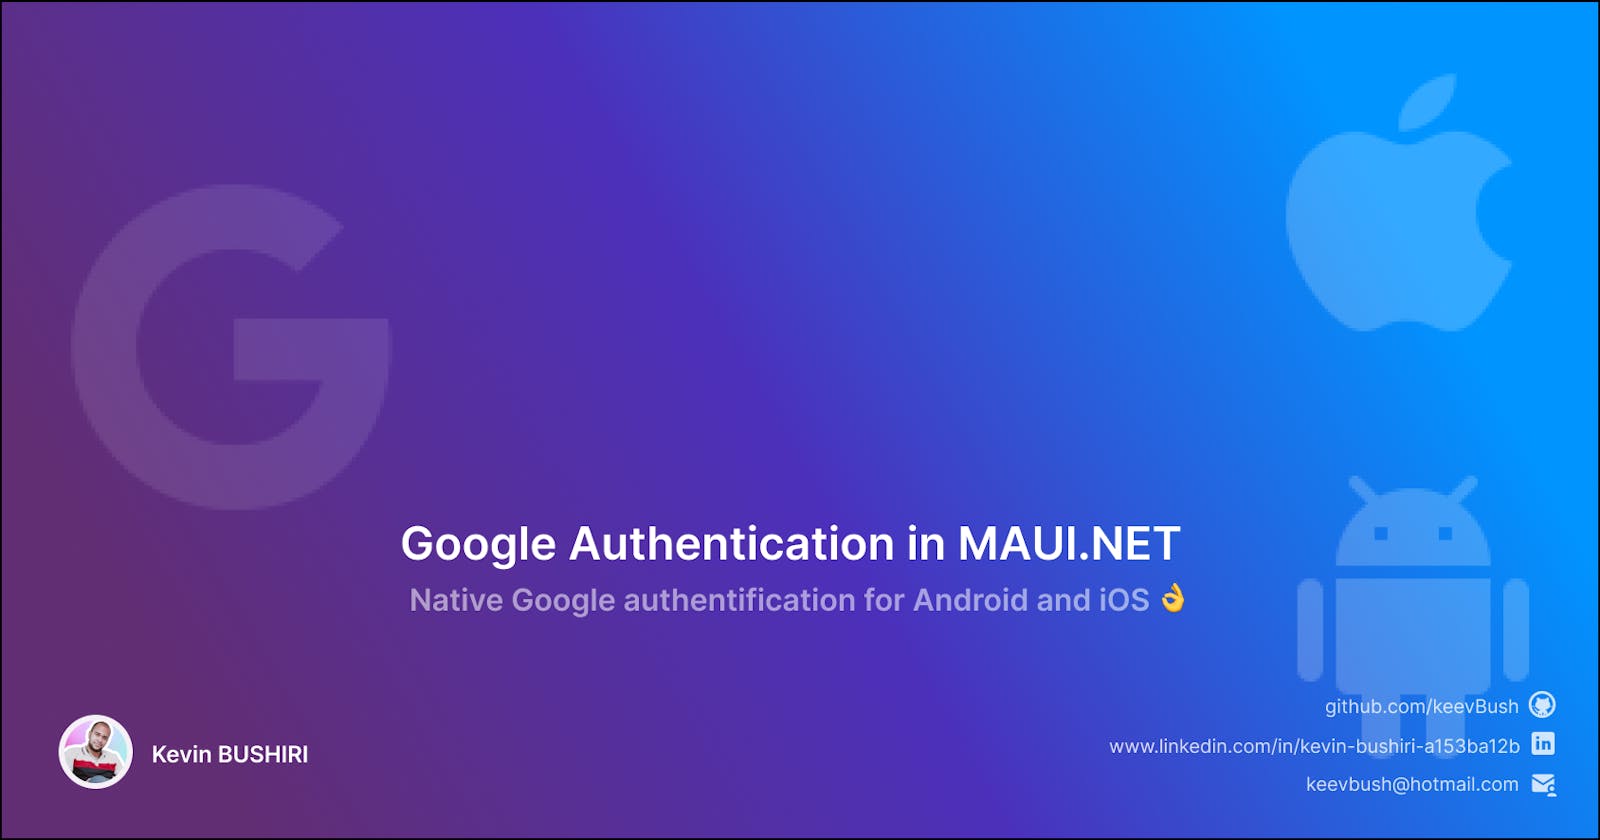 Google Authentication in MAUI.NET